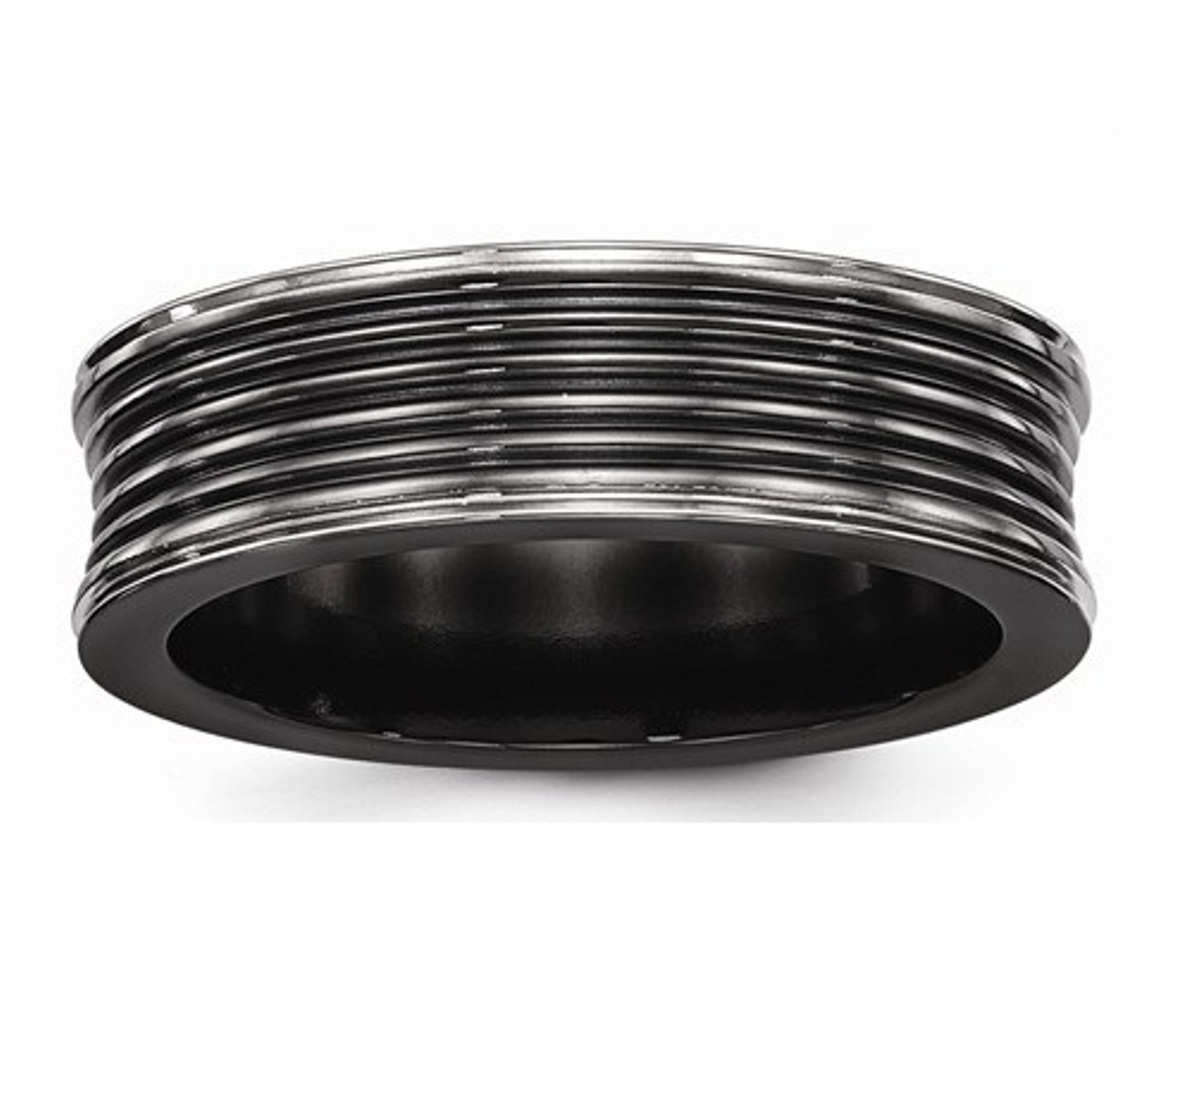  Black Ti Polished Grooved Concave Ring